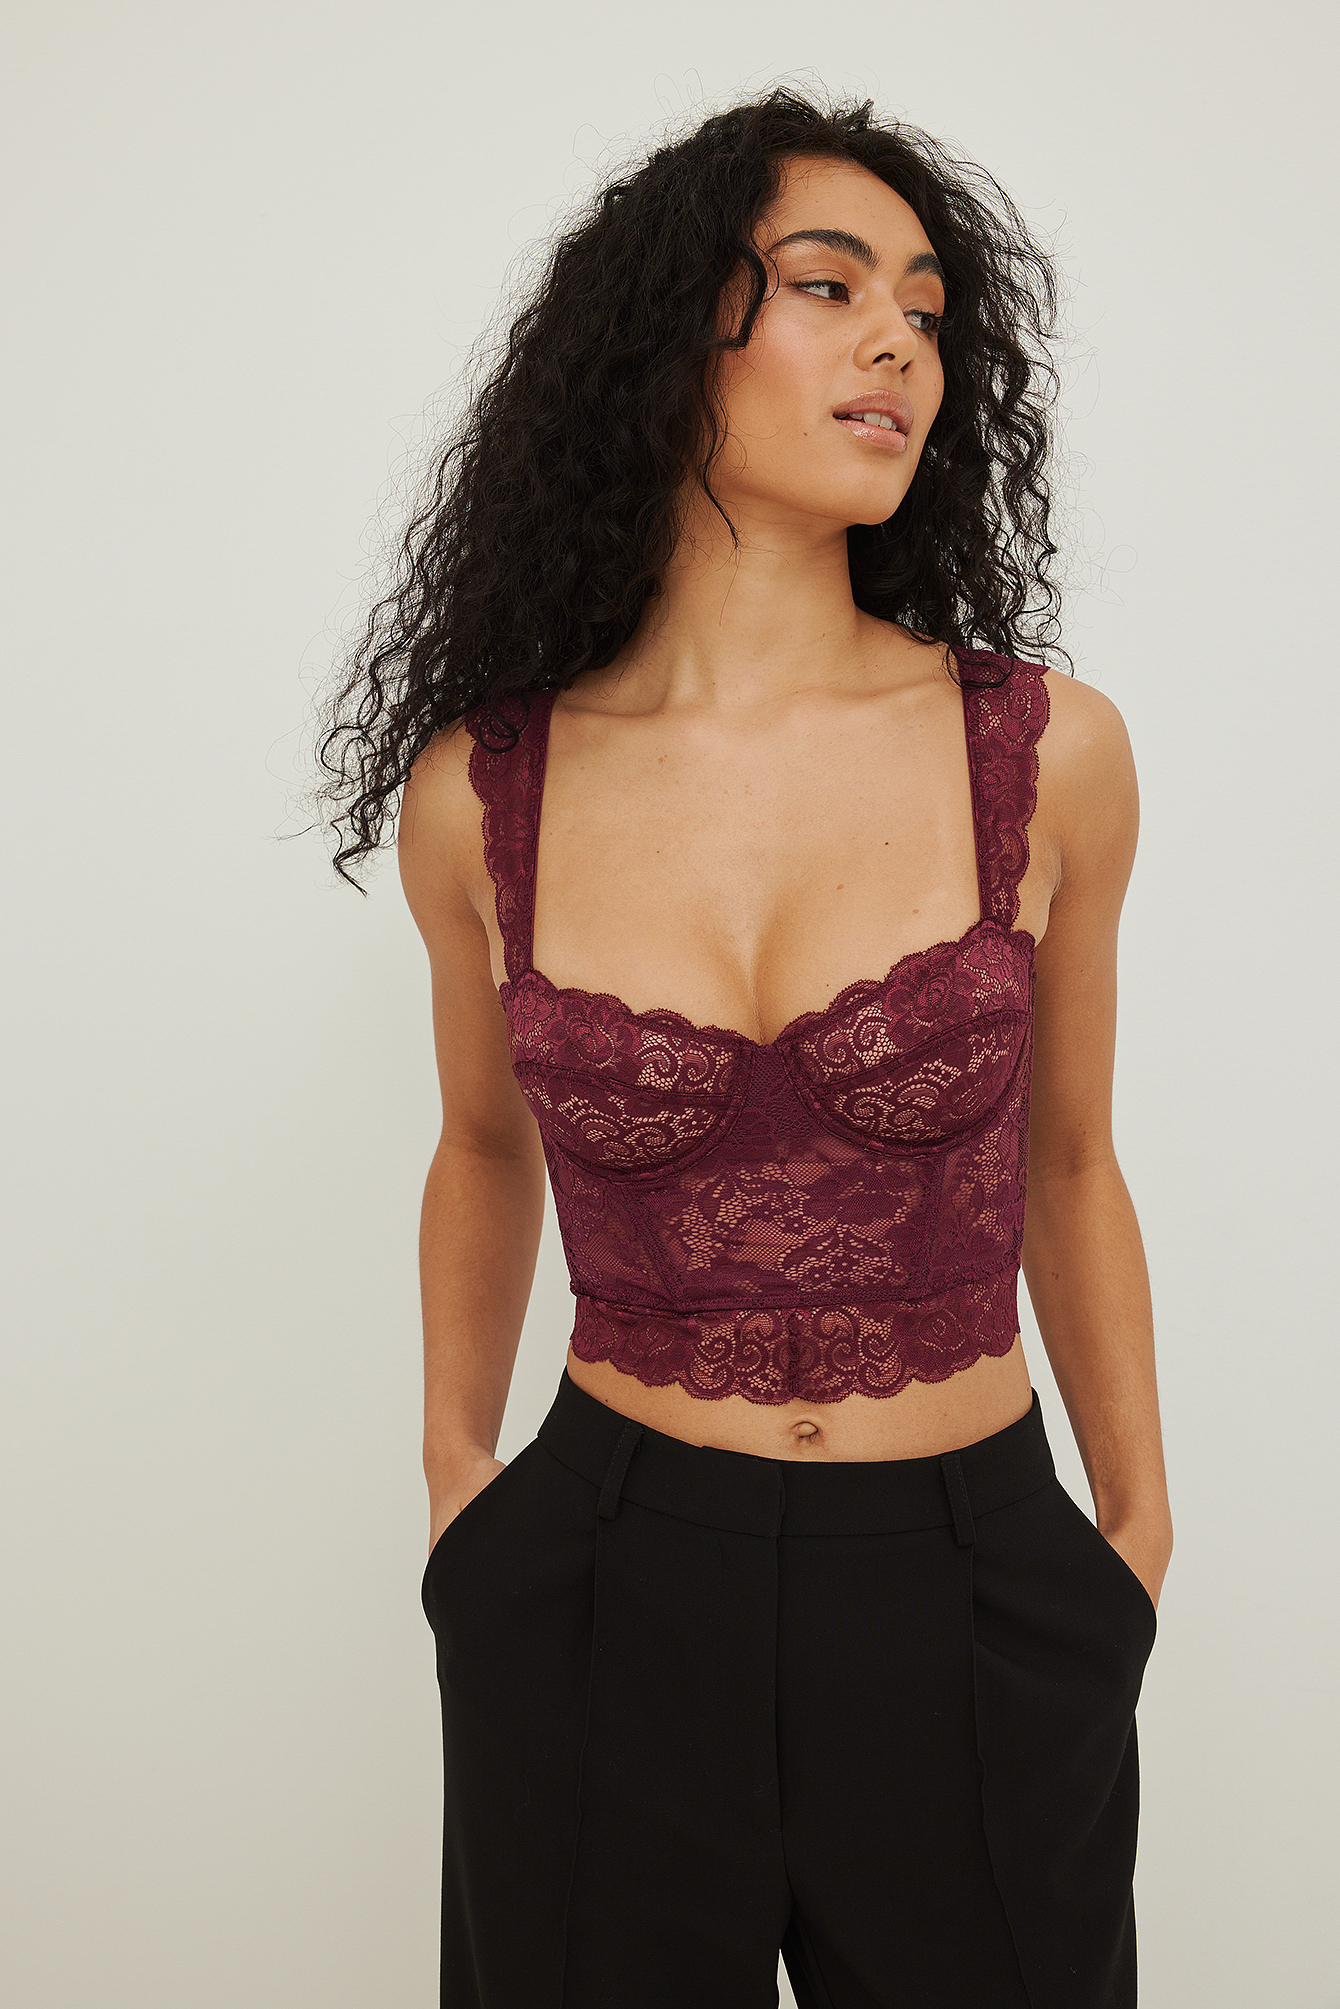 Petite Black Strappy Lace Cupped Bodysuit, Black from Missguided